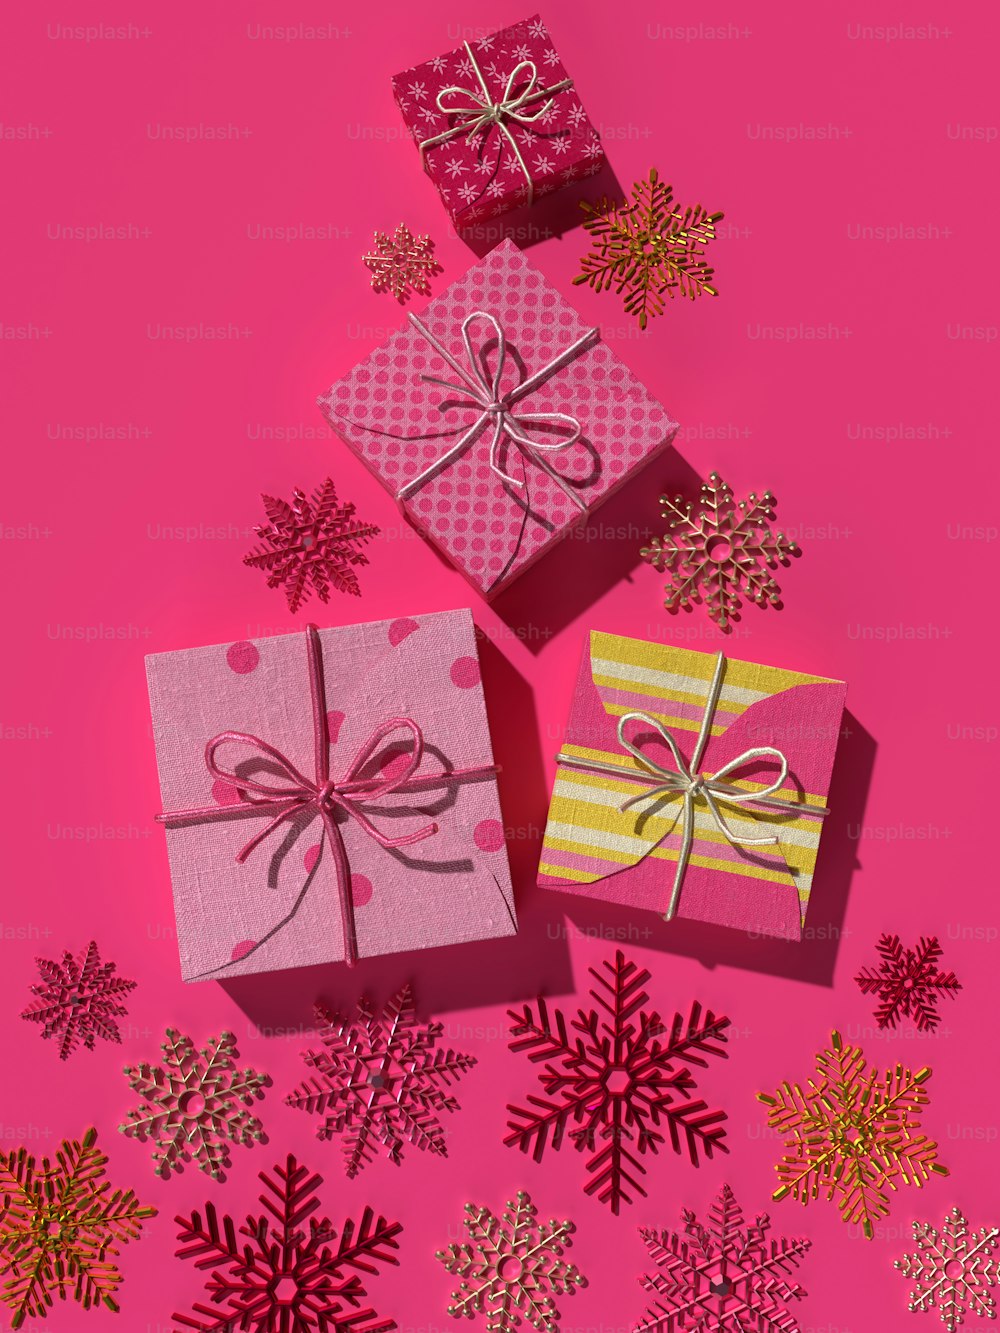 three wrapped presents on a pink background with snowflakes